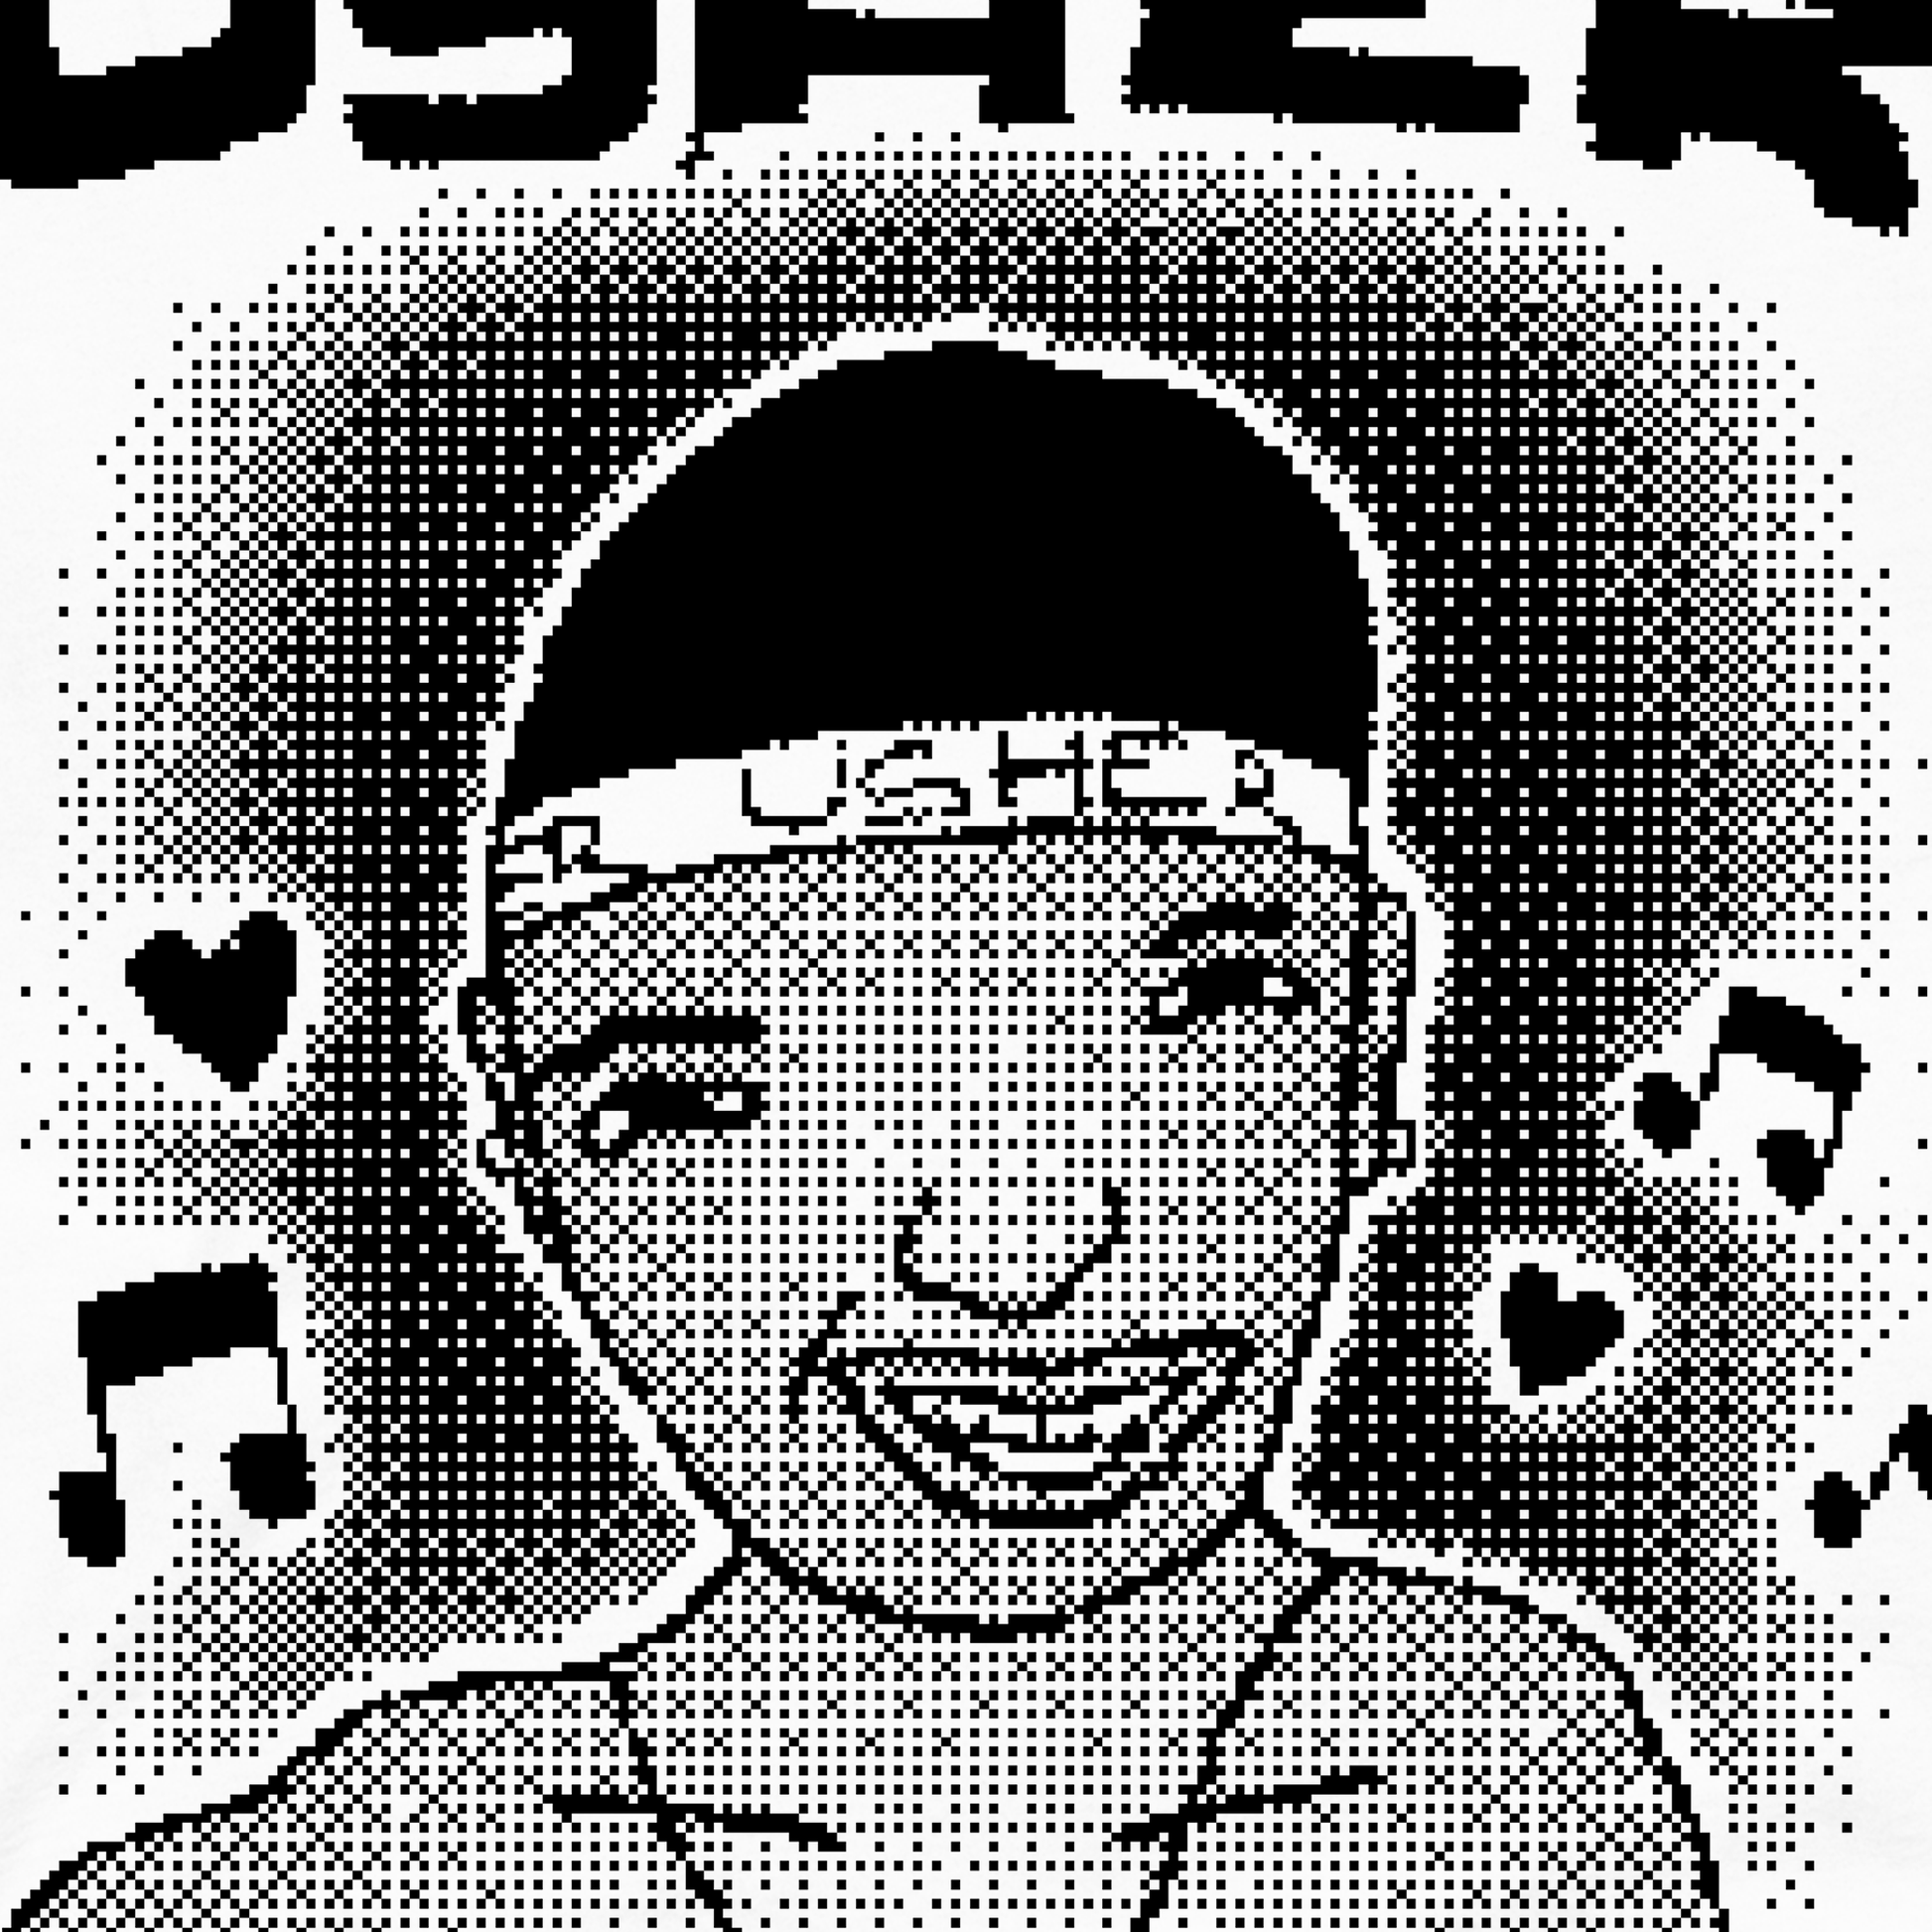 Zoomed detail of a charming childhood bitmap drawing of 90s/y2k R&B singer Usher.